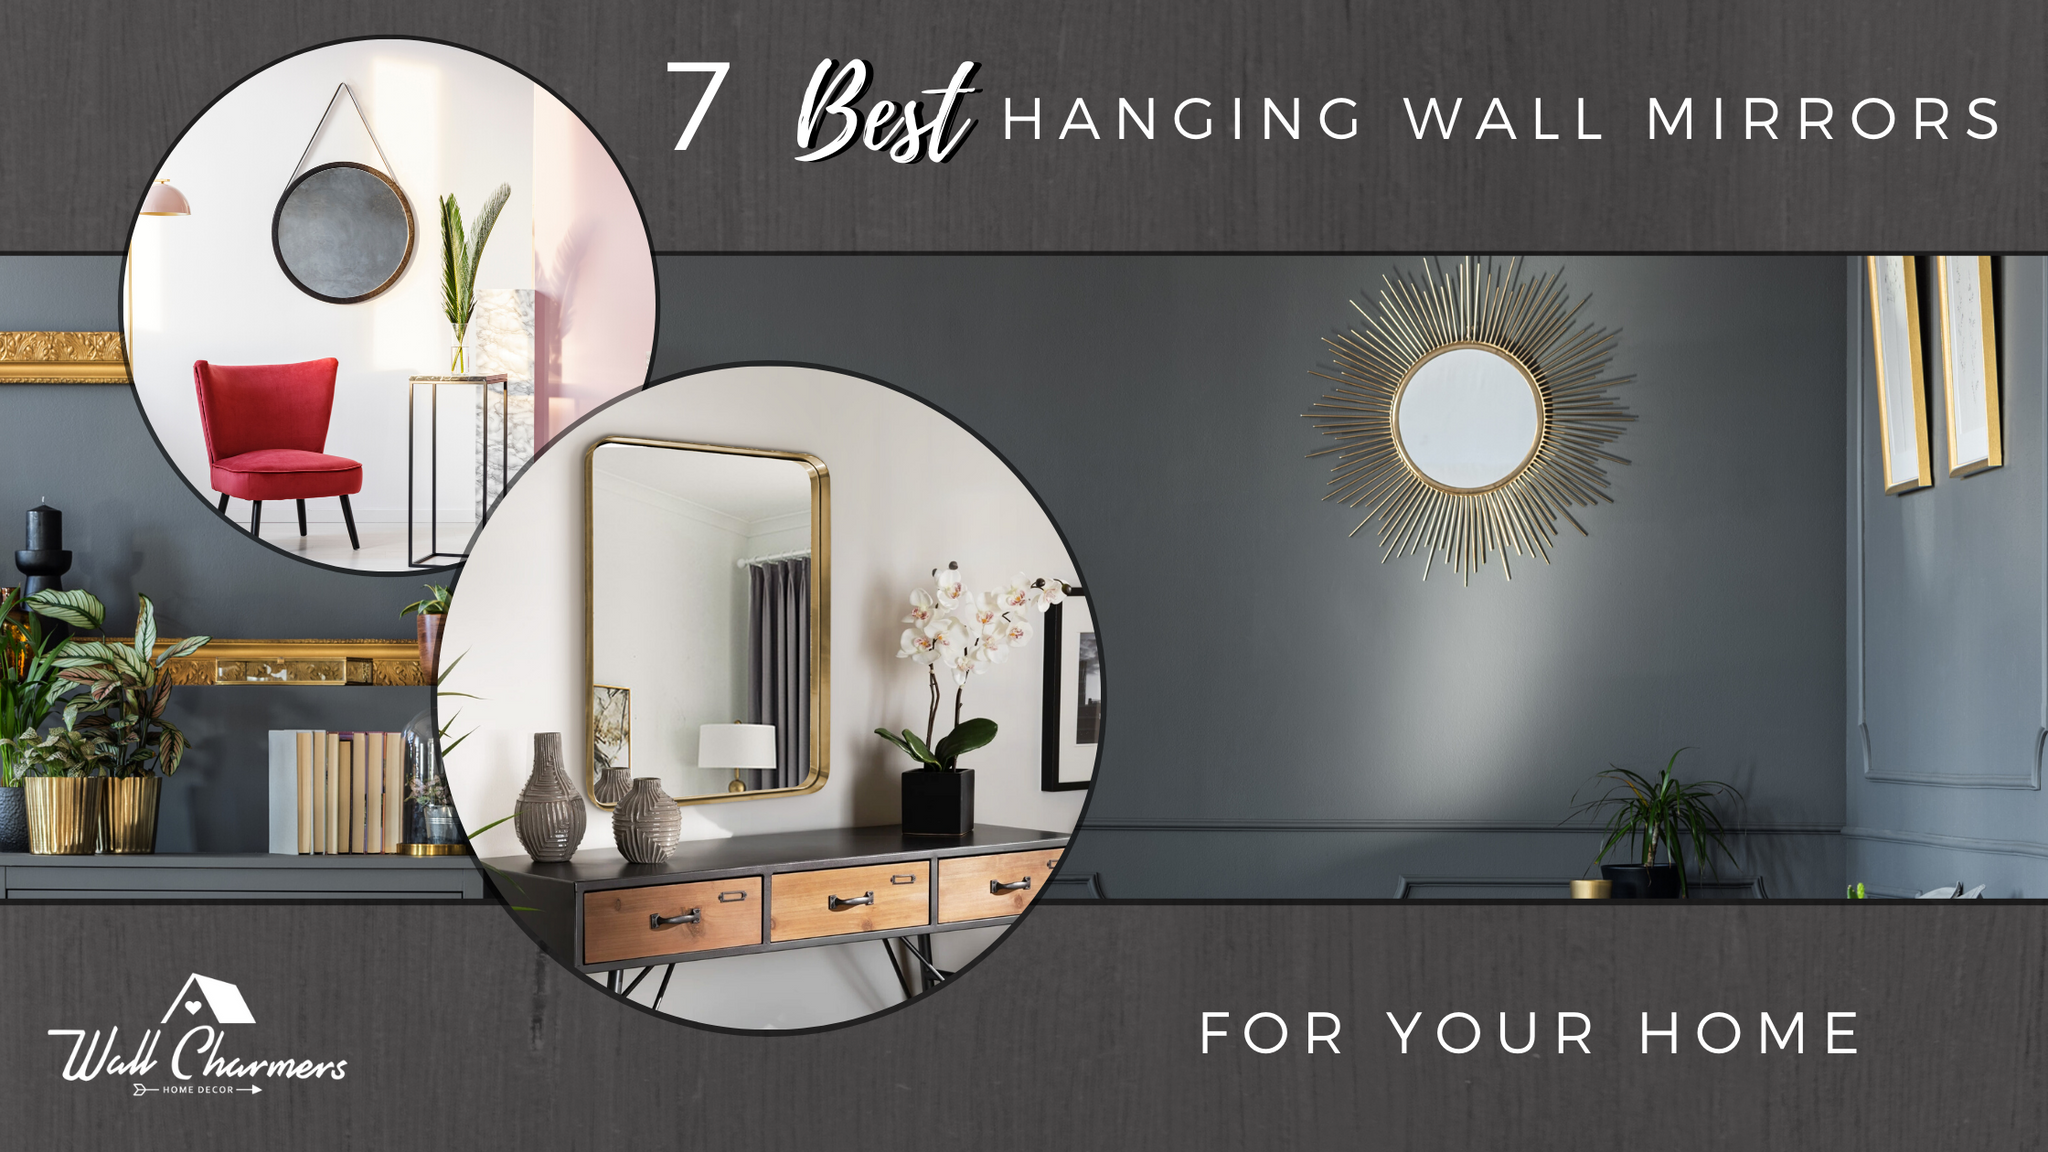 The 7 Best Hanging Wall Mirrors for your Home!